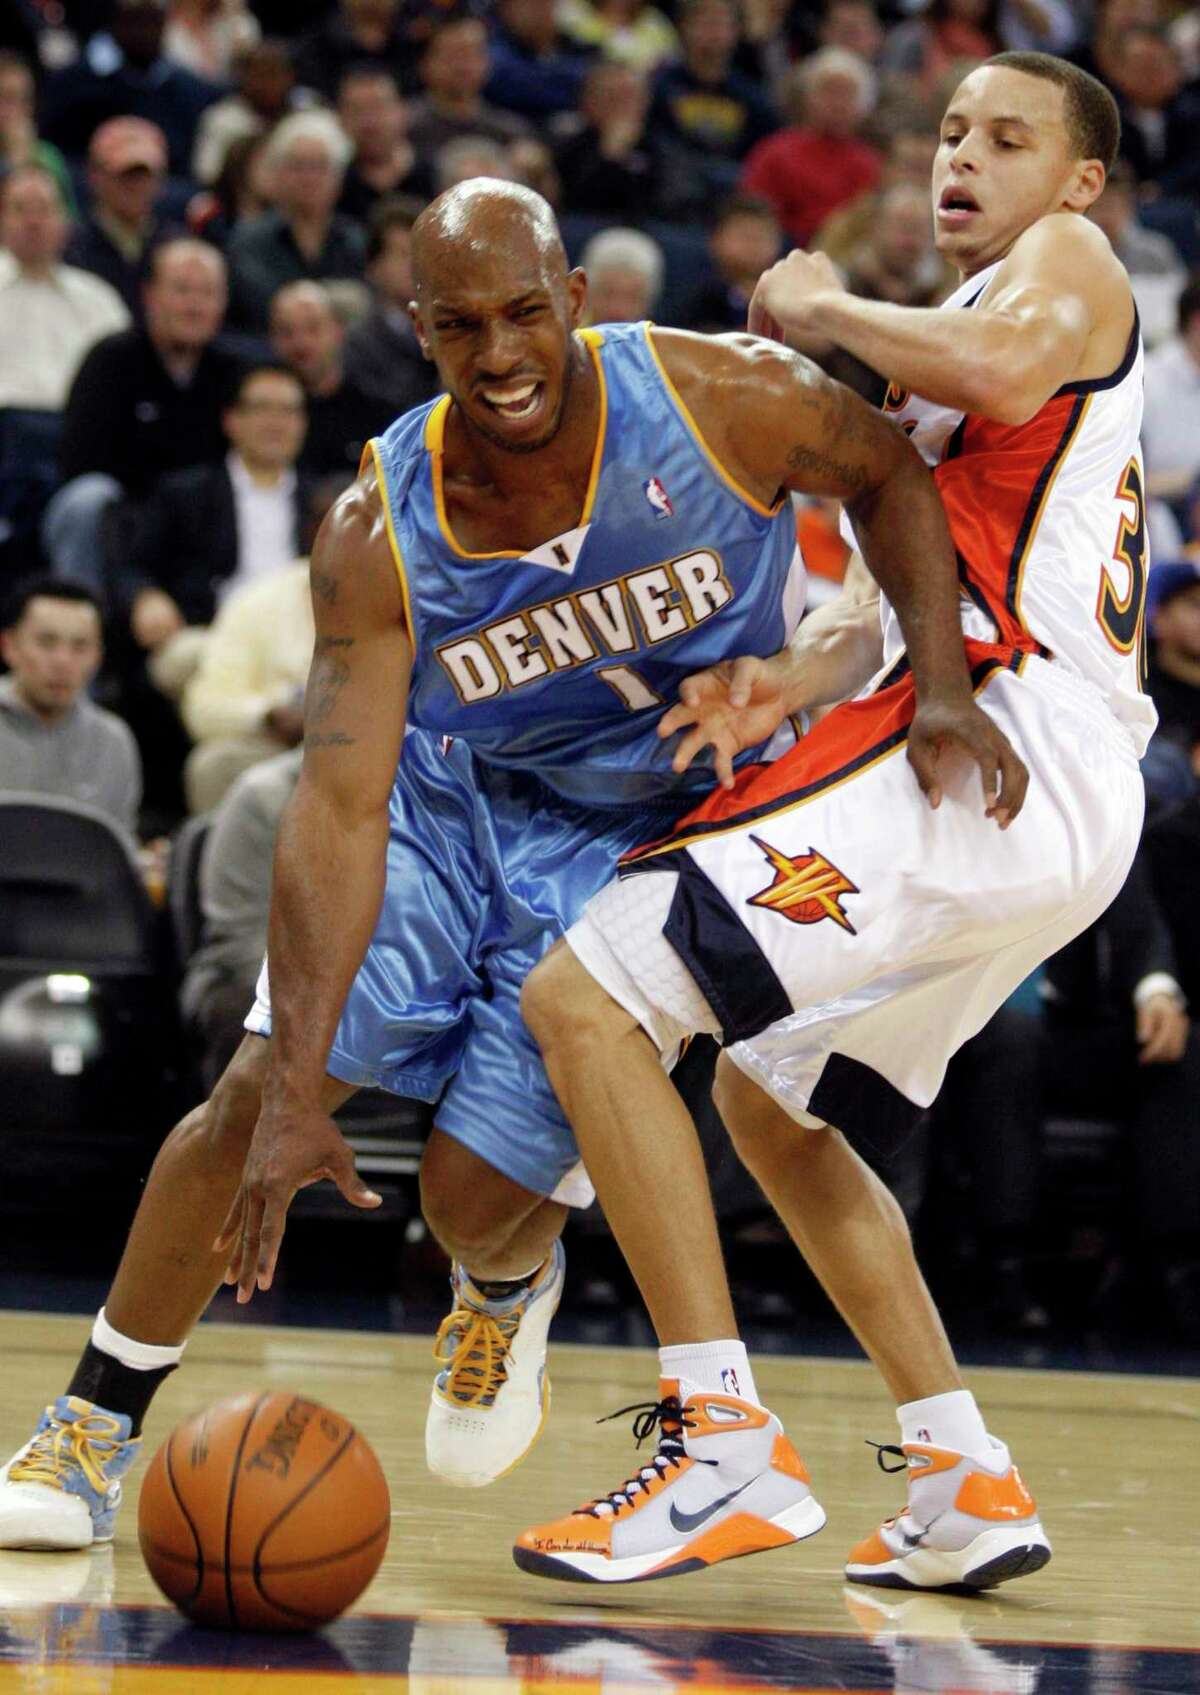 Then-Denver guard Chauncey Billups drives around a young Stephen Curry (not quite 22 at the time) during an NBA game in Oakland on Feb. 25, 2010.